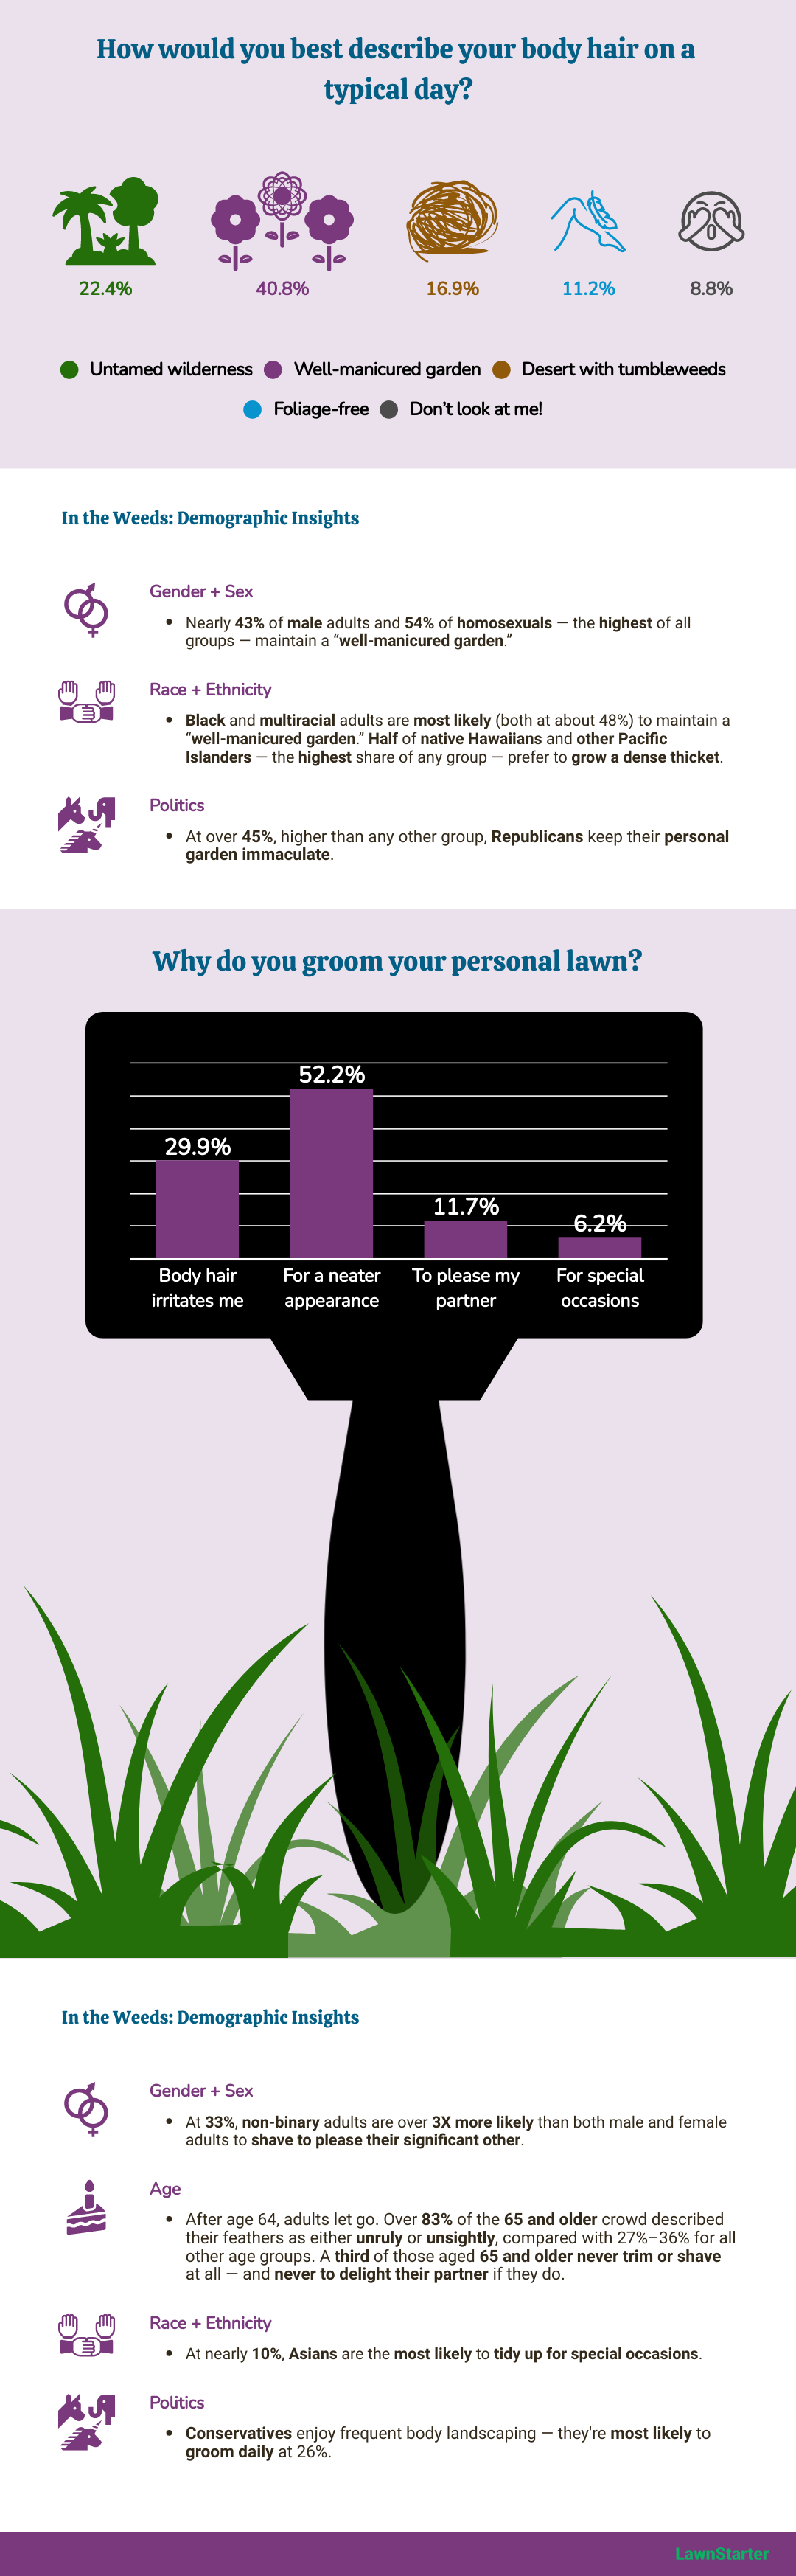 infographic showing grooming personal preferences